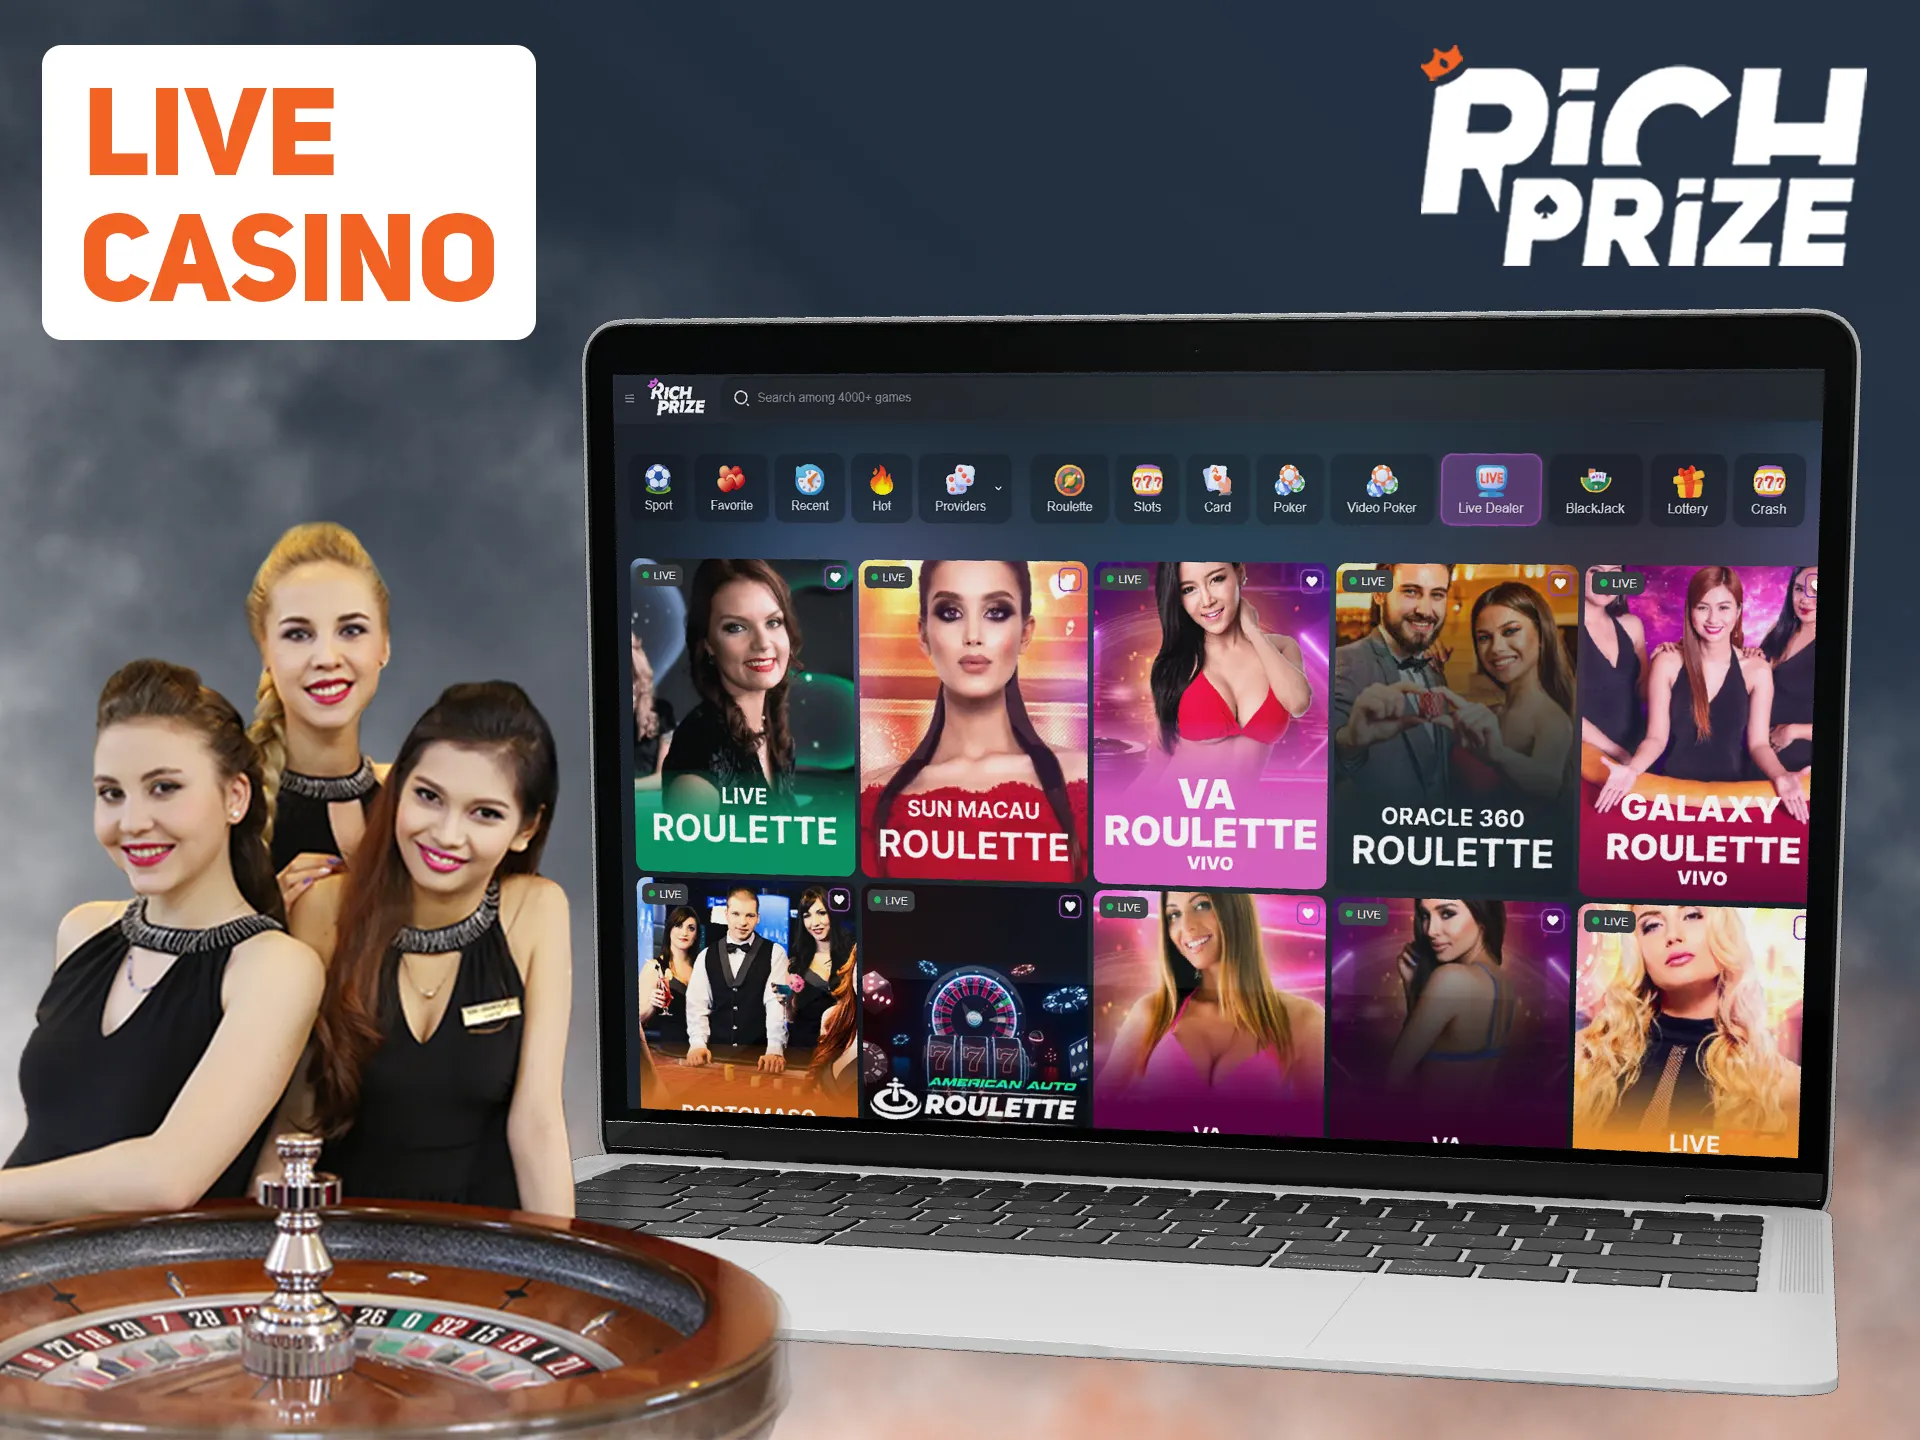 Play casino games in live with real people at Richprize.